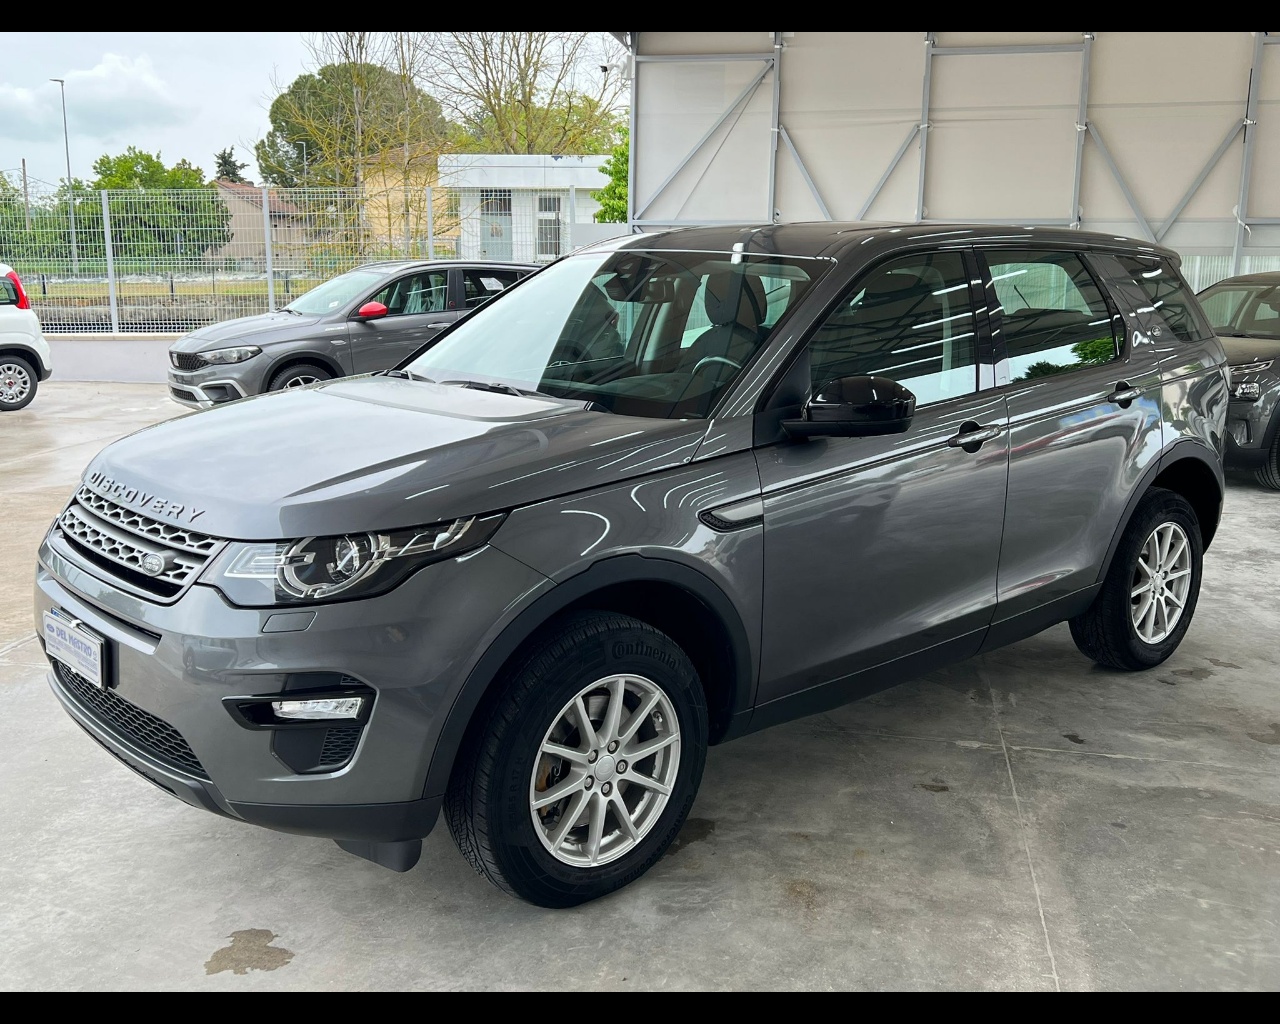 Foto Discovery Sport